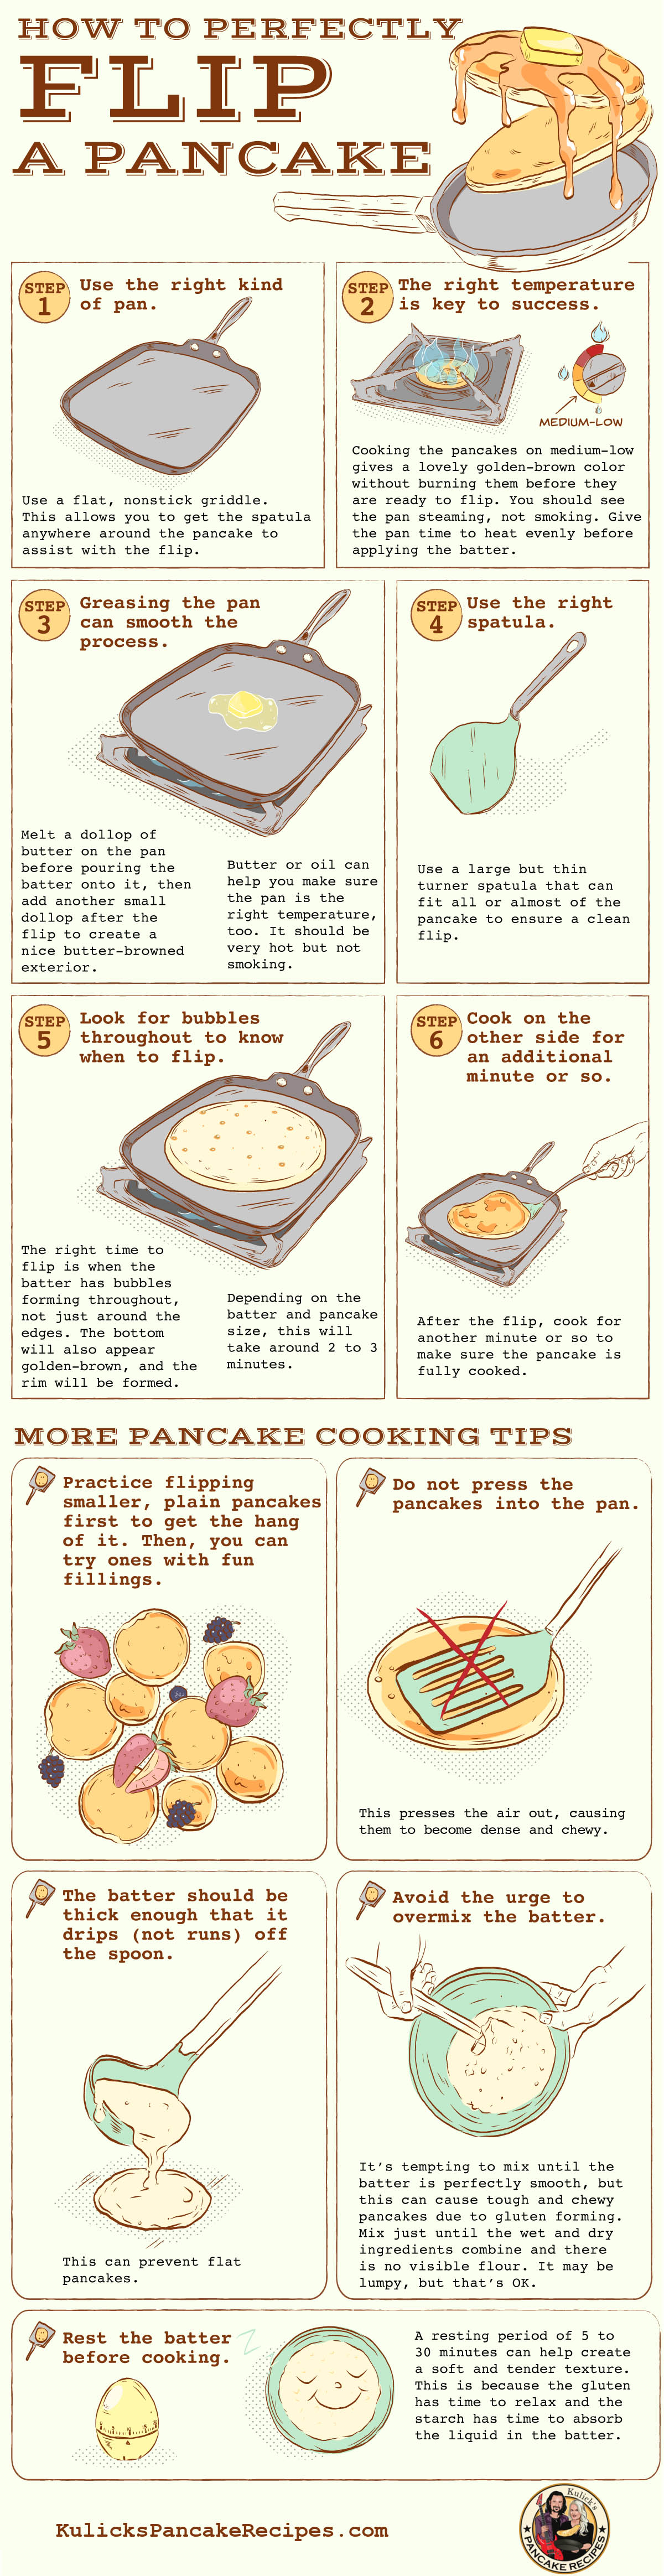 How to Perfectly Flip a Pancake